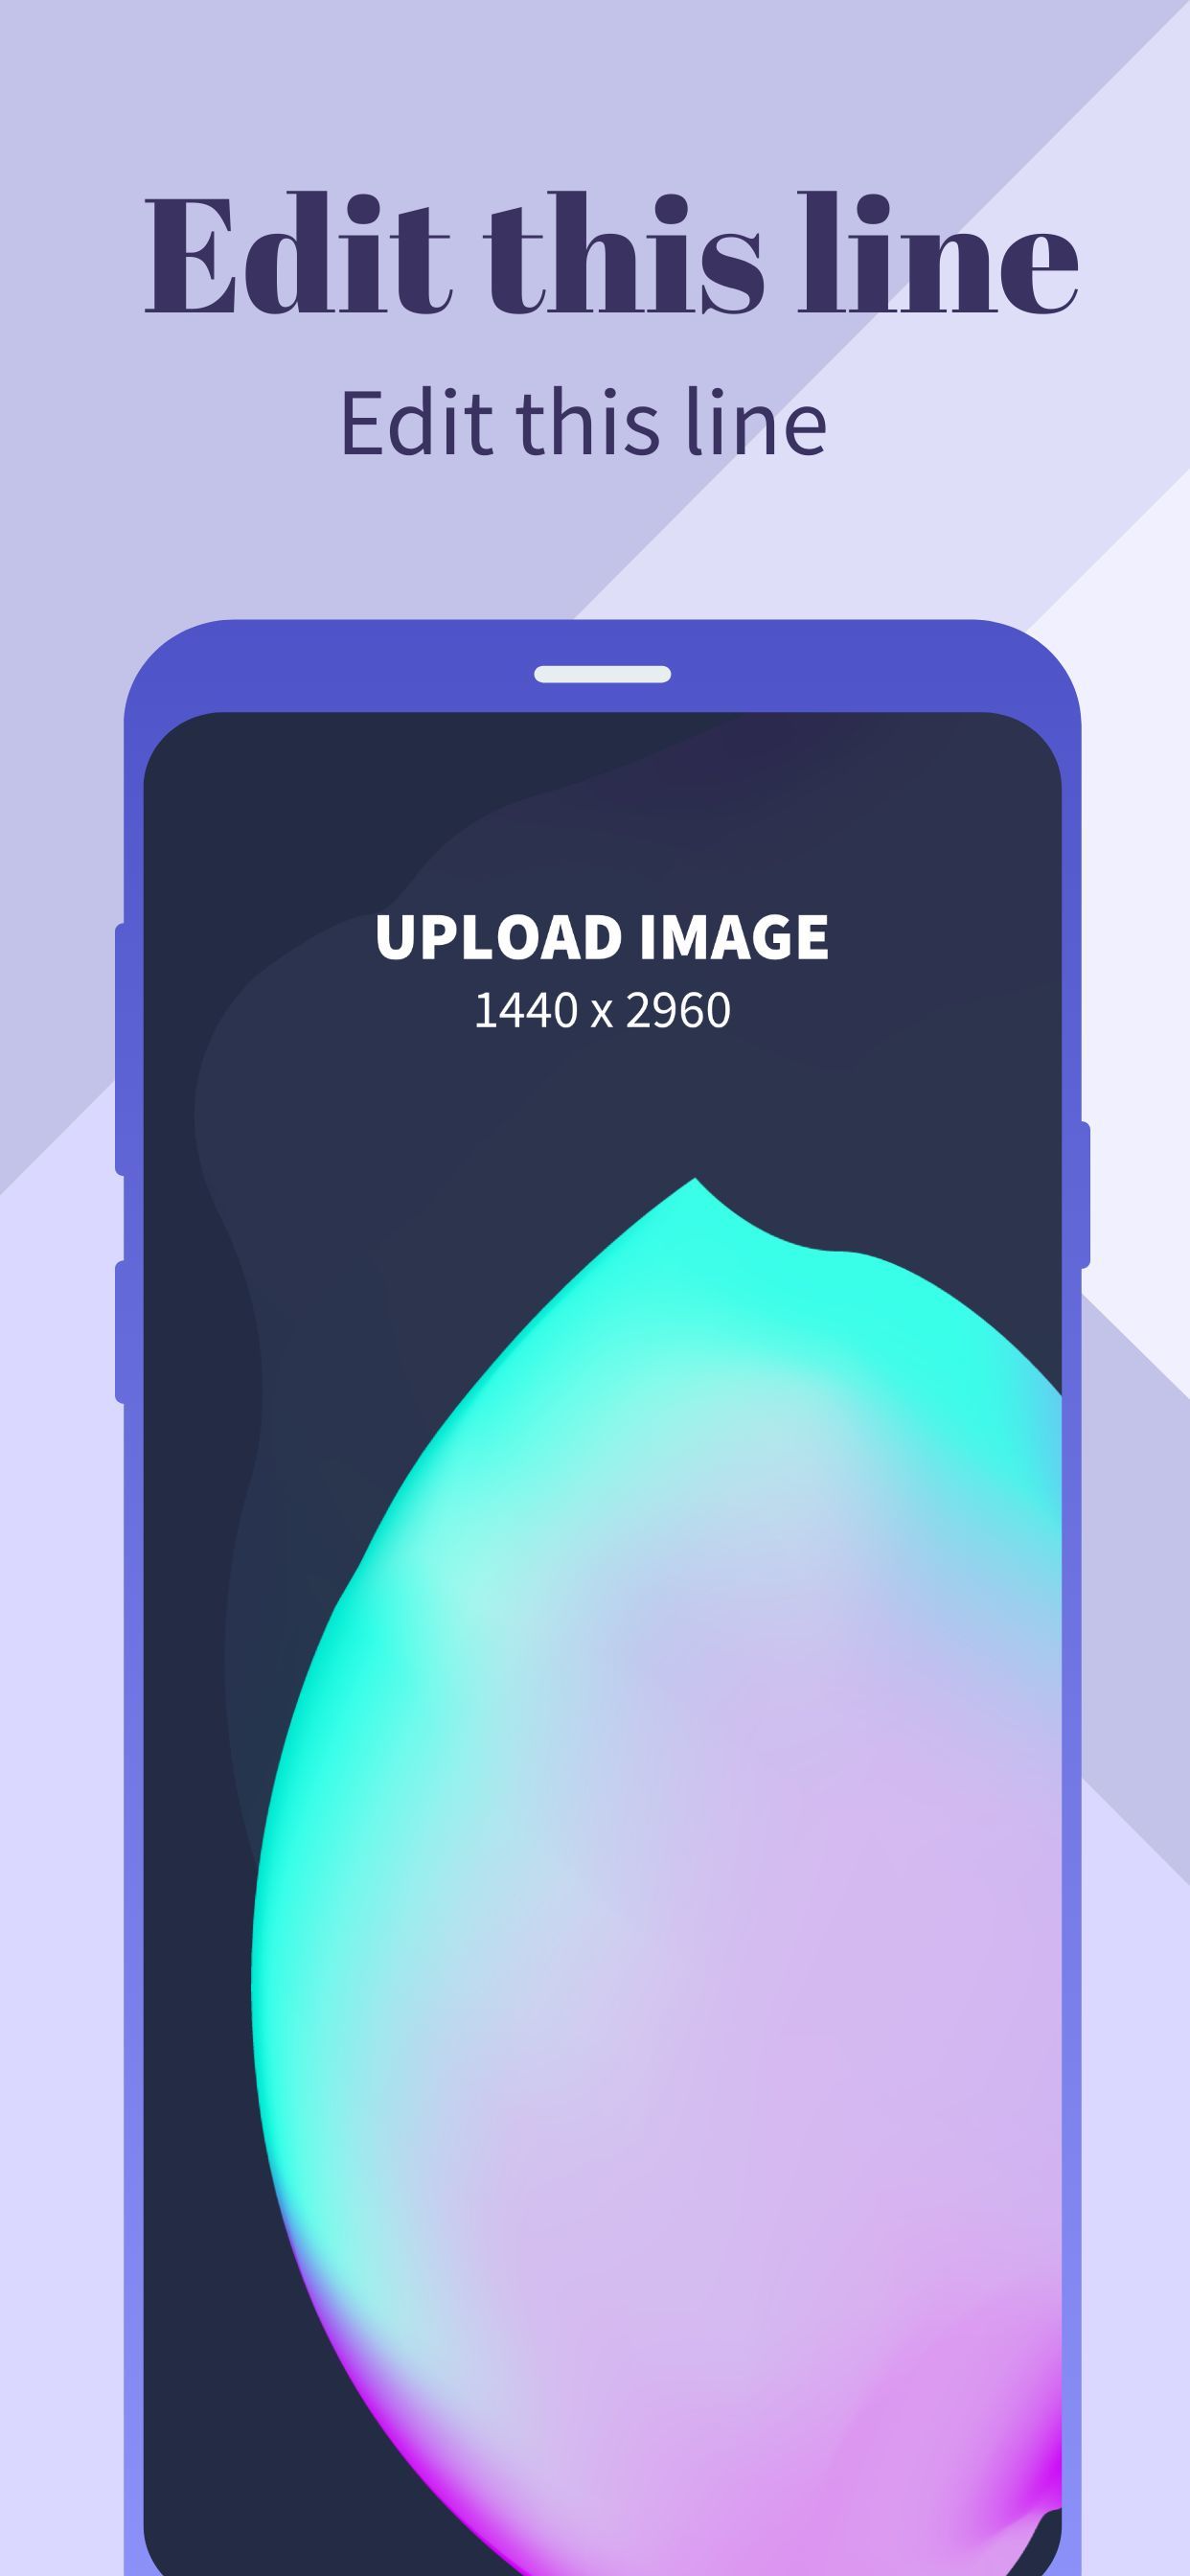 Samsung S9 Screenshot 5 template. Quickly edit text, colors, images, and more for free.